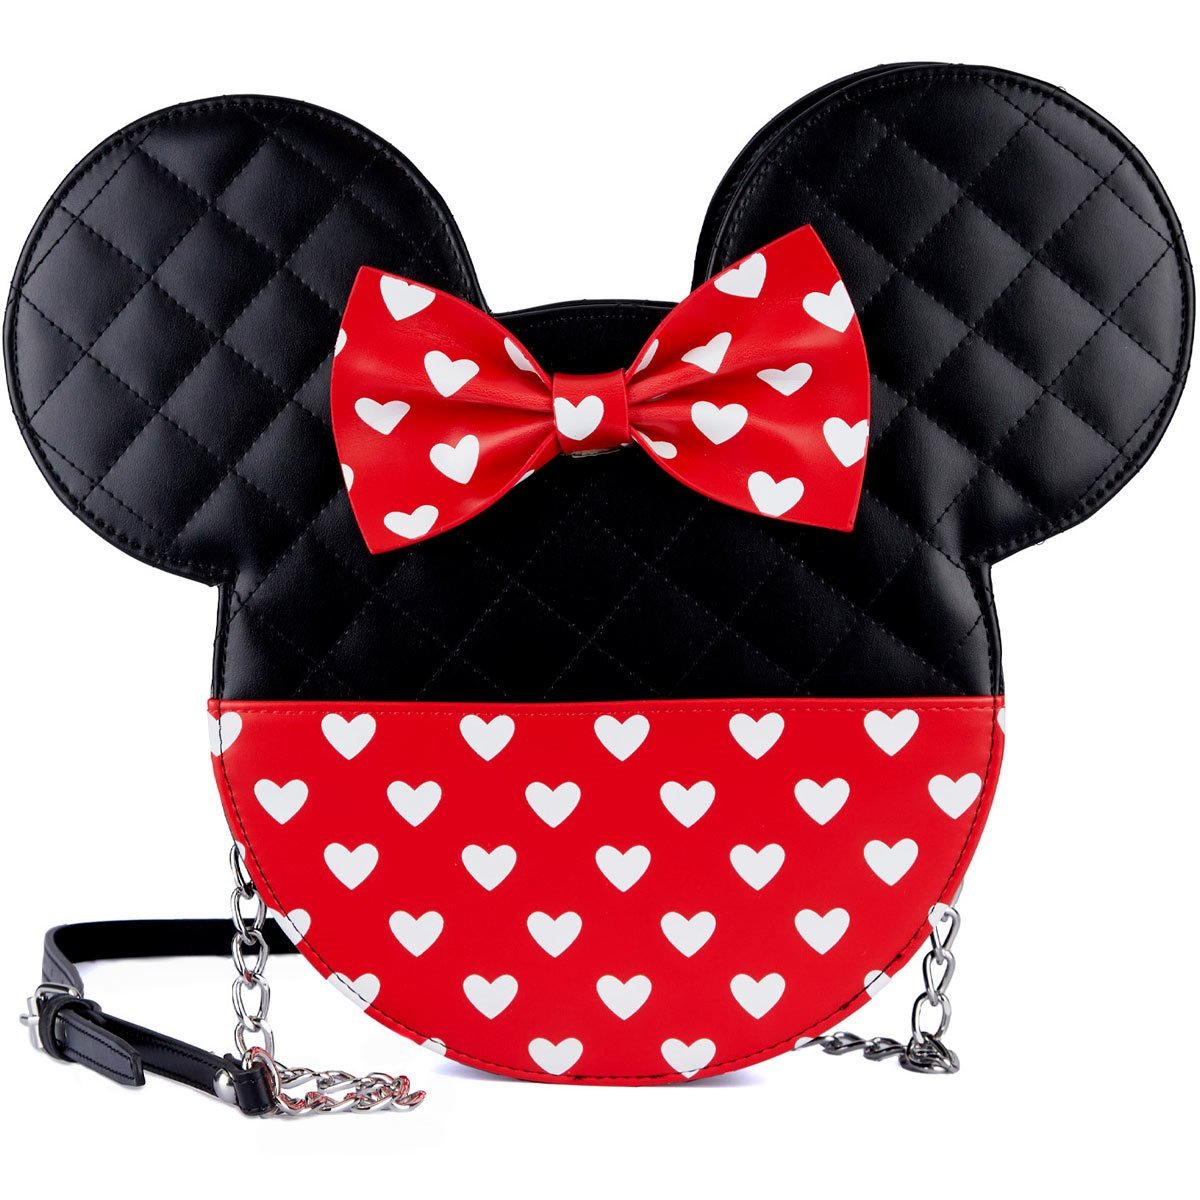 Minnie Mouse Crossbody Bag by Loungefly | Disney Store